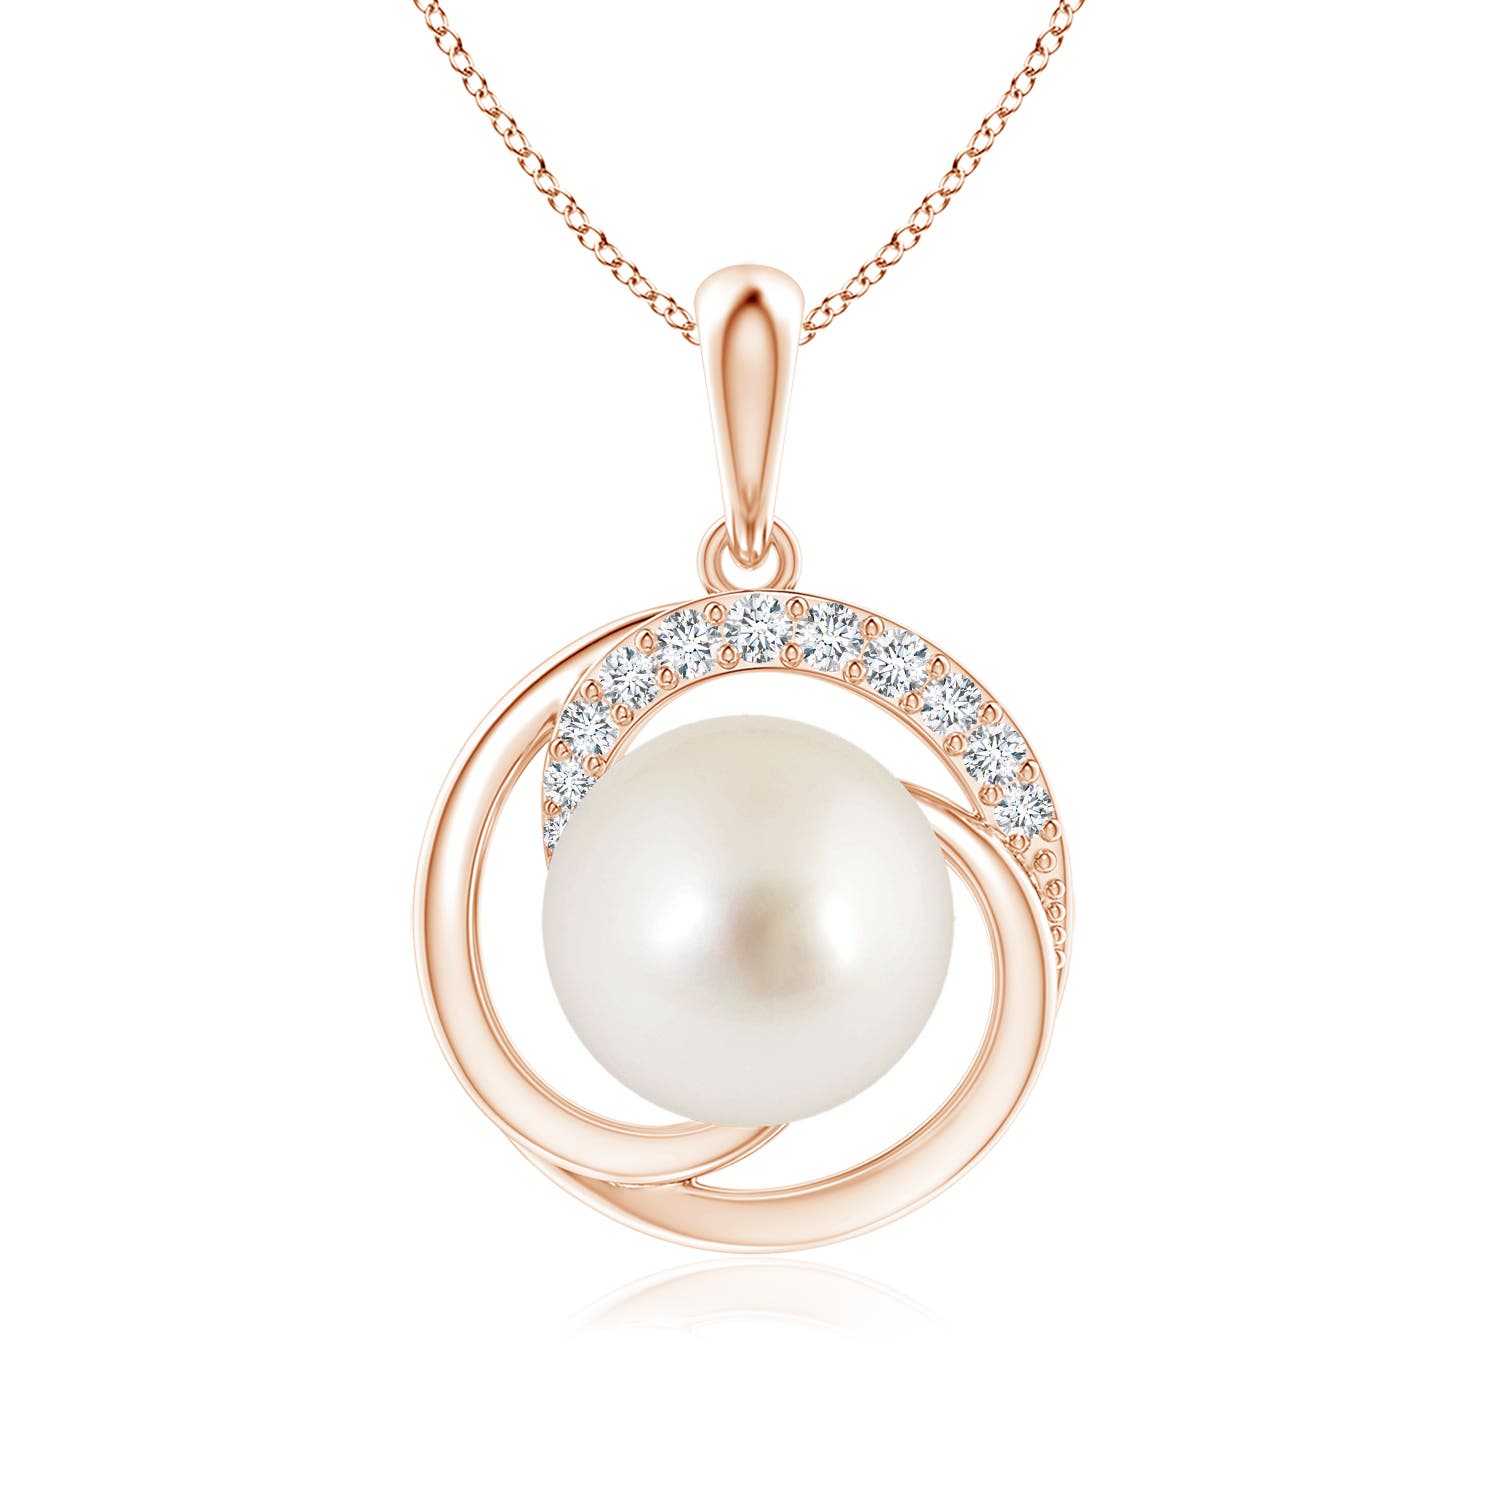 AAAA - South Sea Cultured Pearl / 5.36 CT / 14 KT Rose Gold